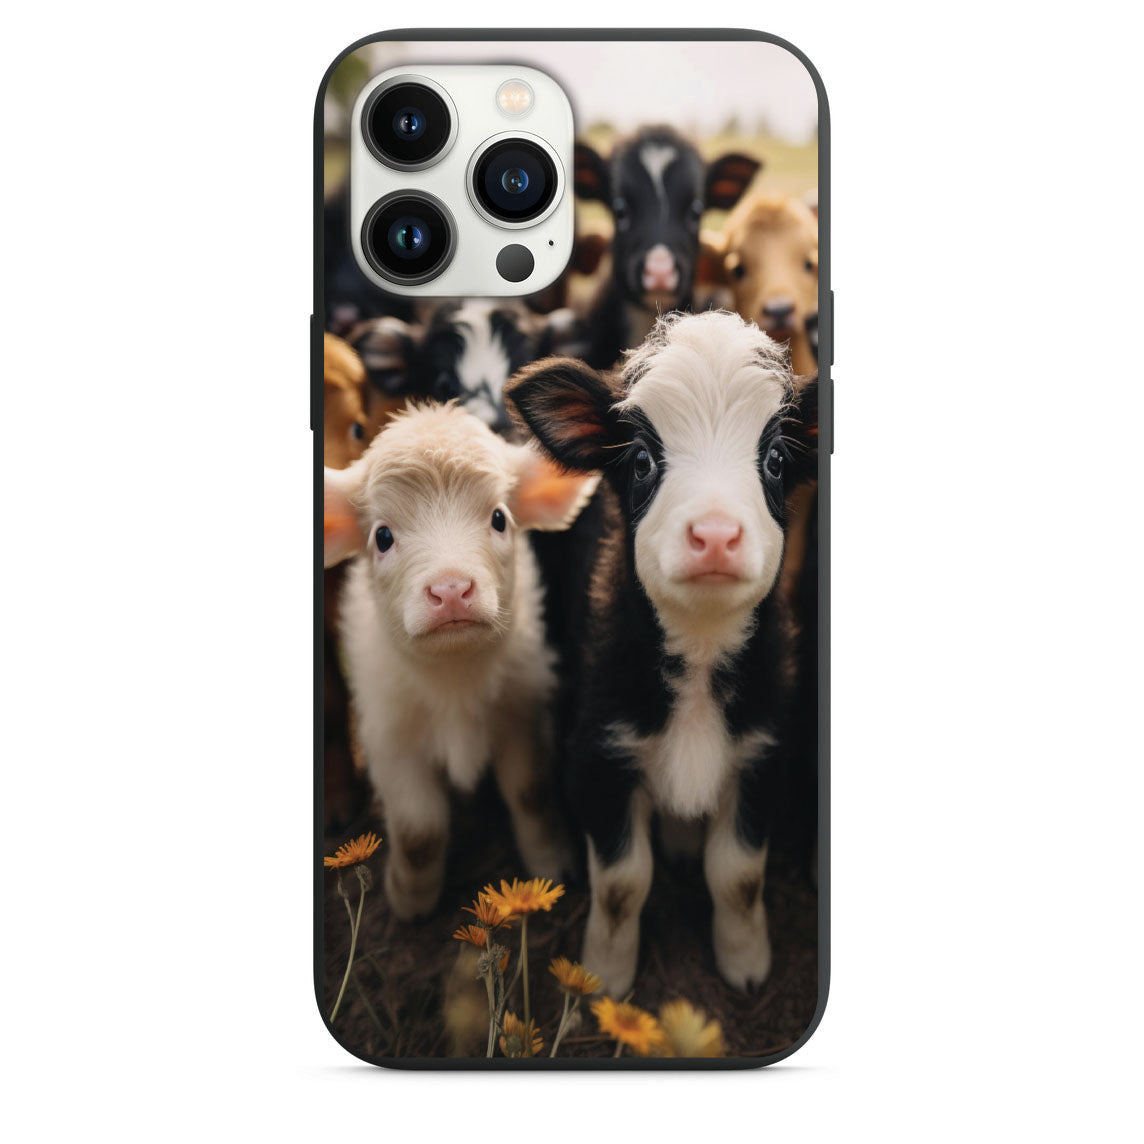 Captivating Stares: Cute Baby Cows Phone Case Design Phone Case for iPhone 7 8 X XS XR SE 11 12 13 14 15 Pro Max Mini